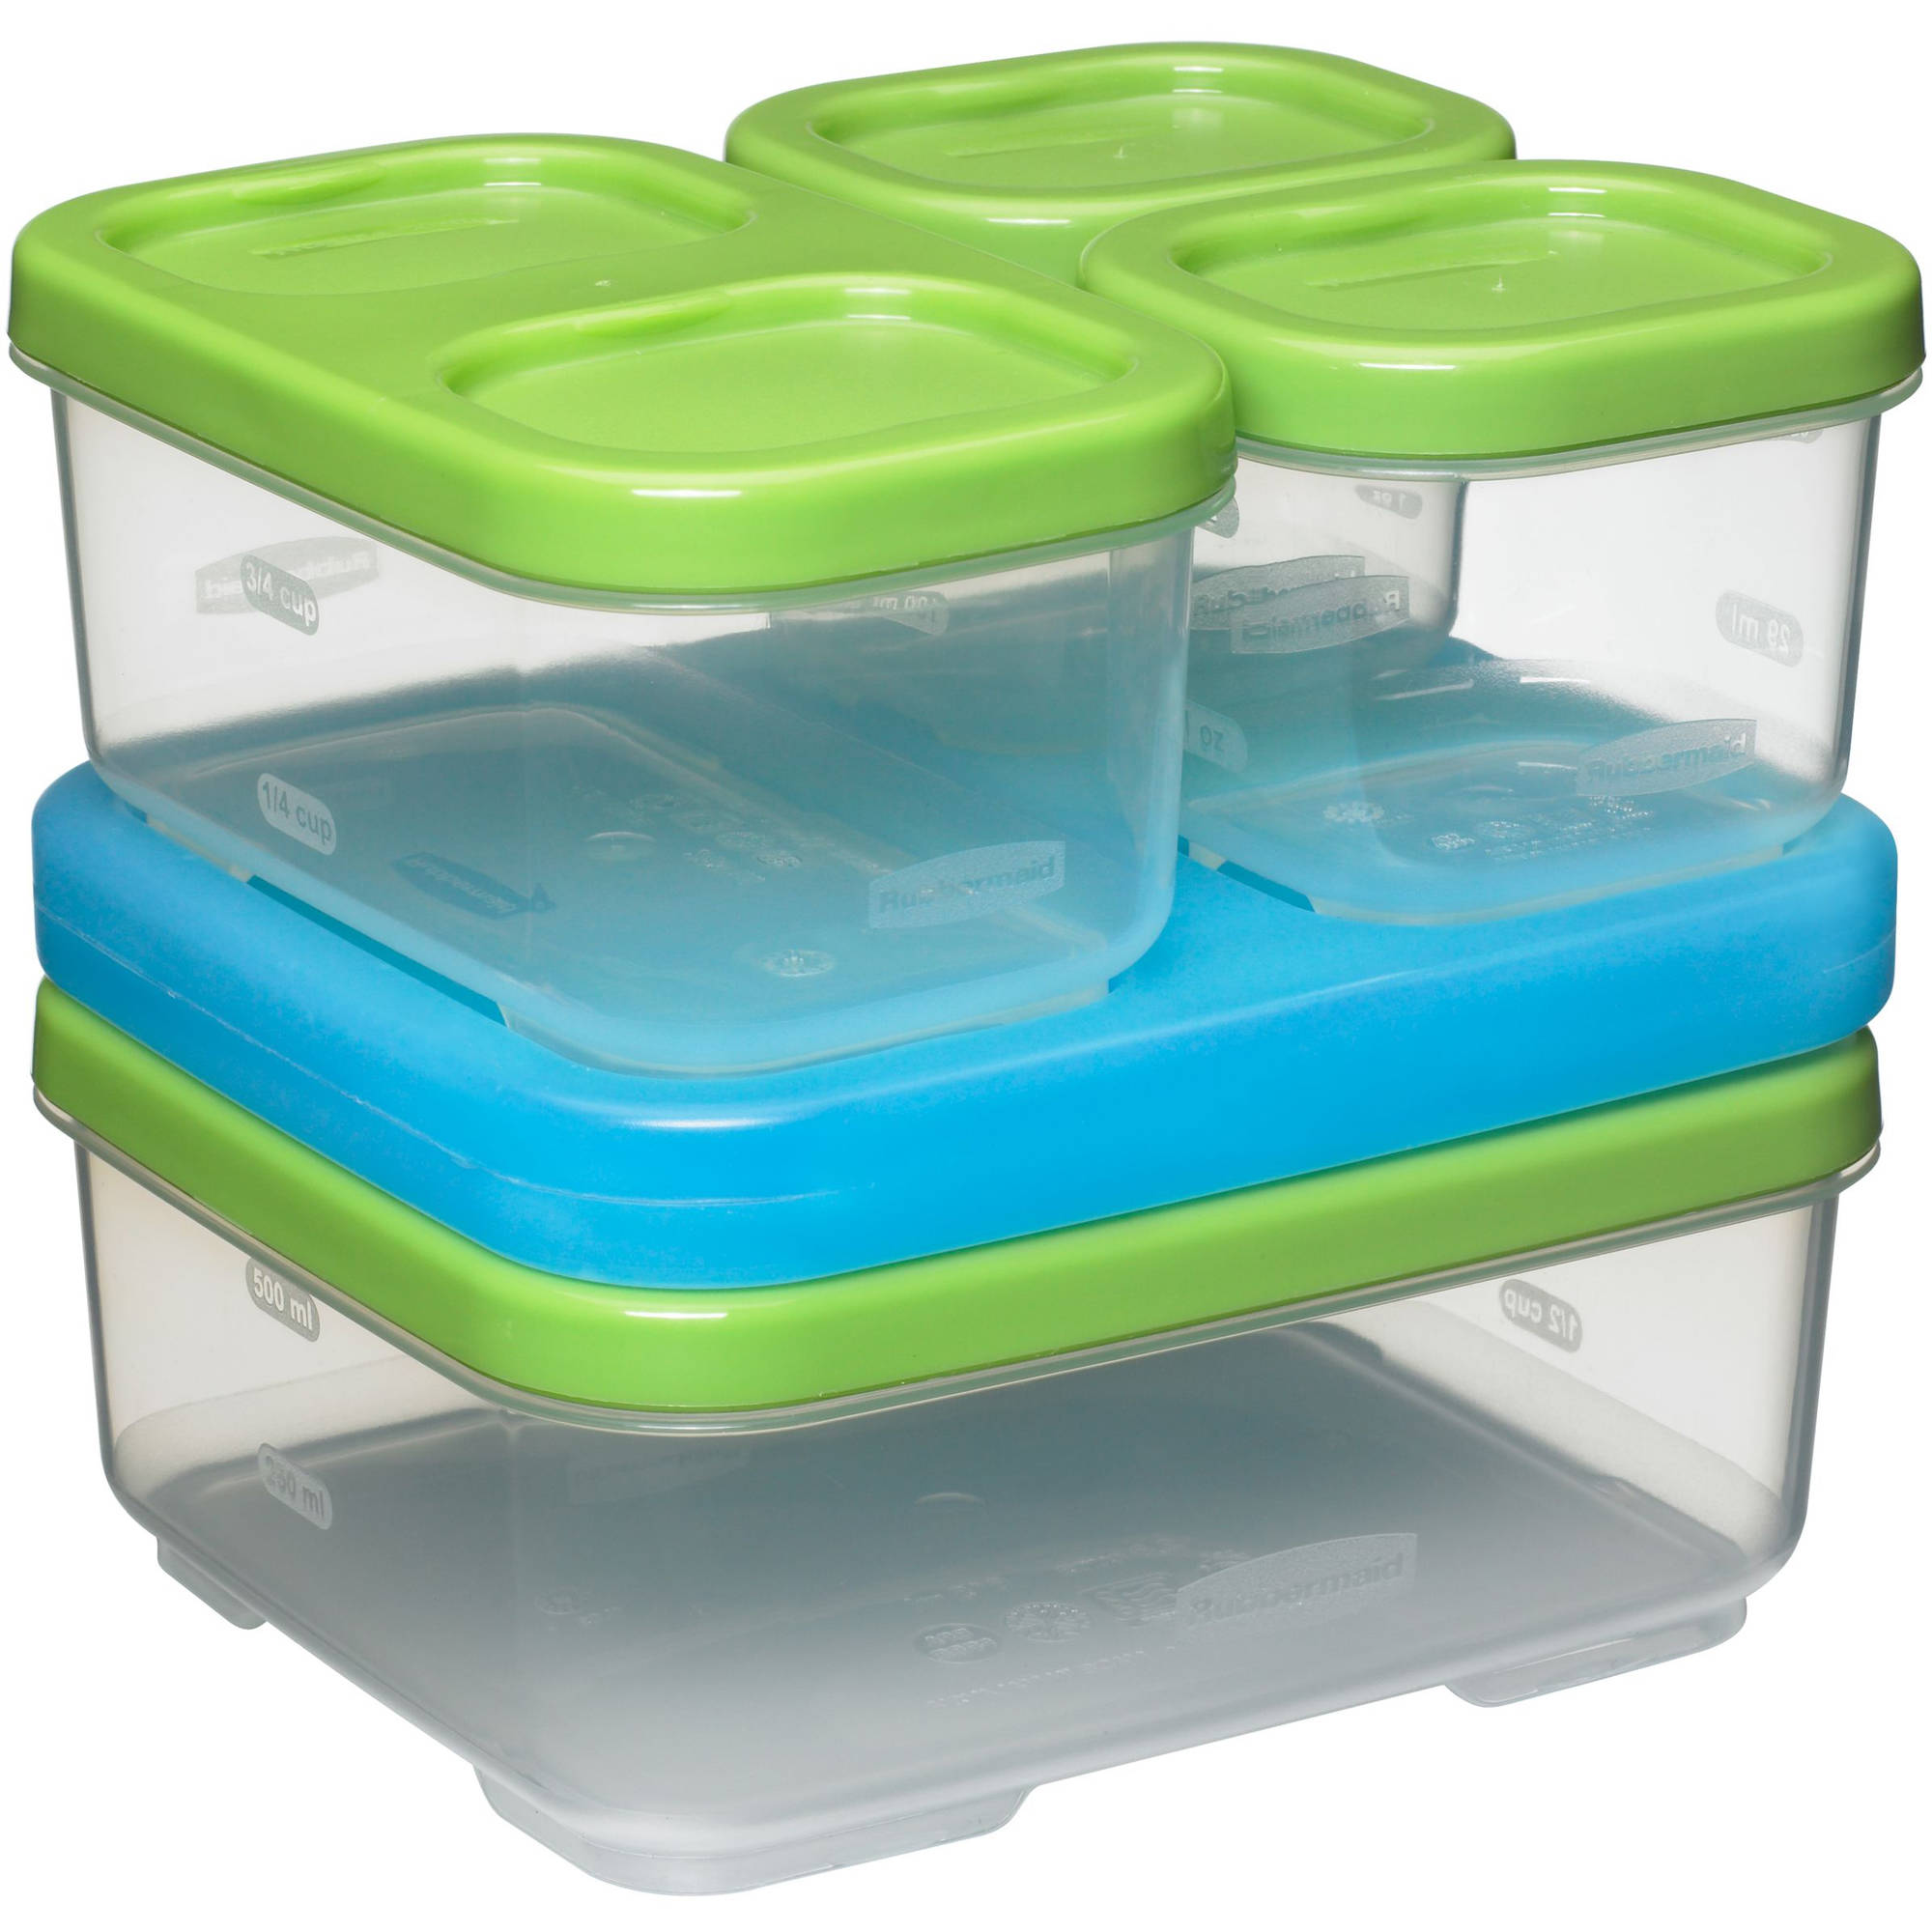 Rubbermaid, Lunchbox, Sandwich Kit, Green 5 Count - image 4 of 6